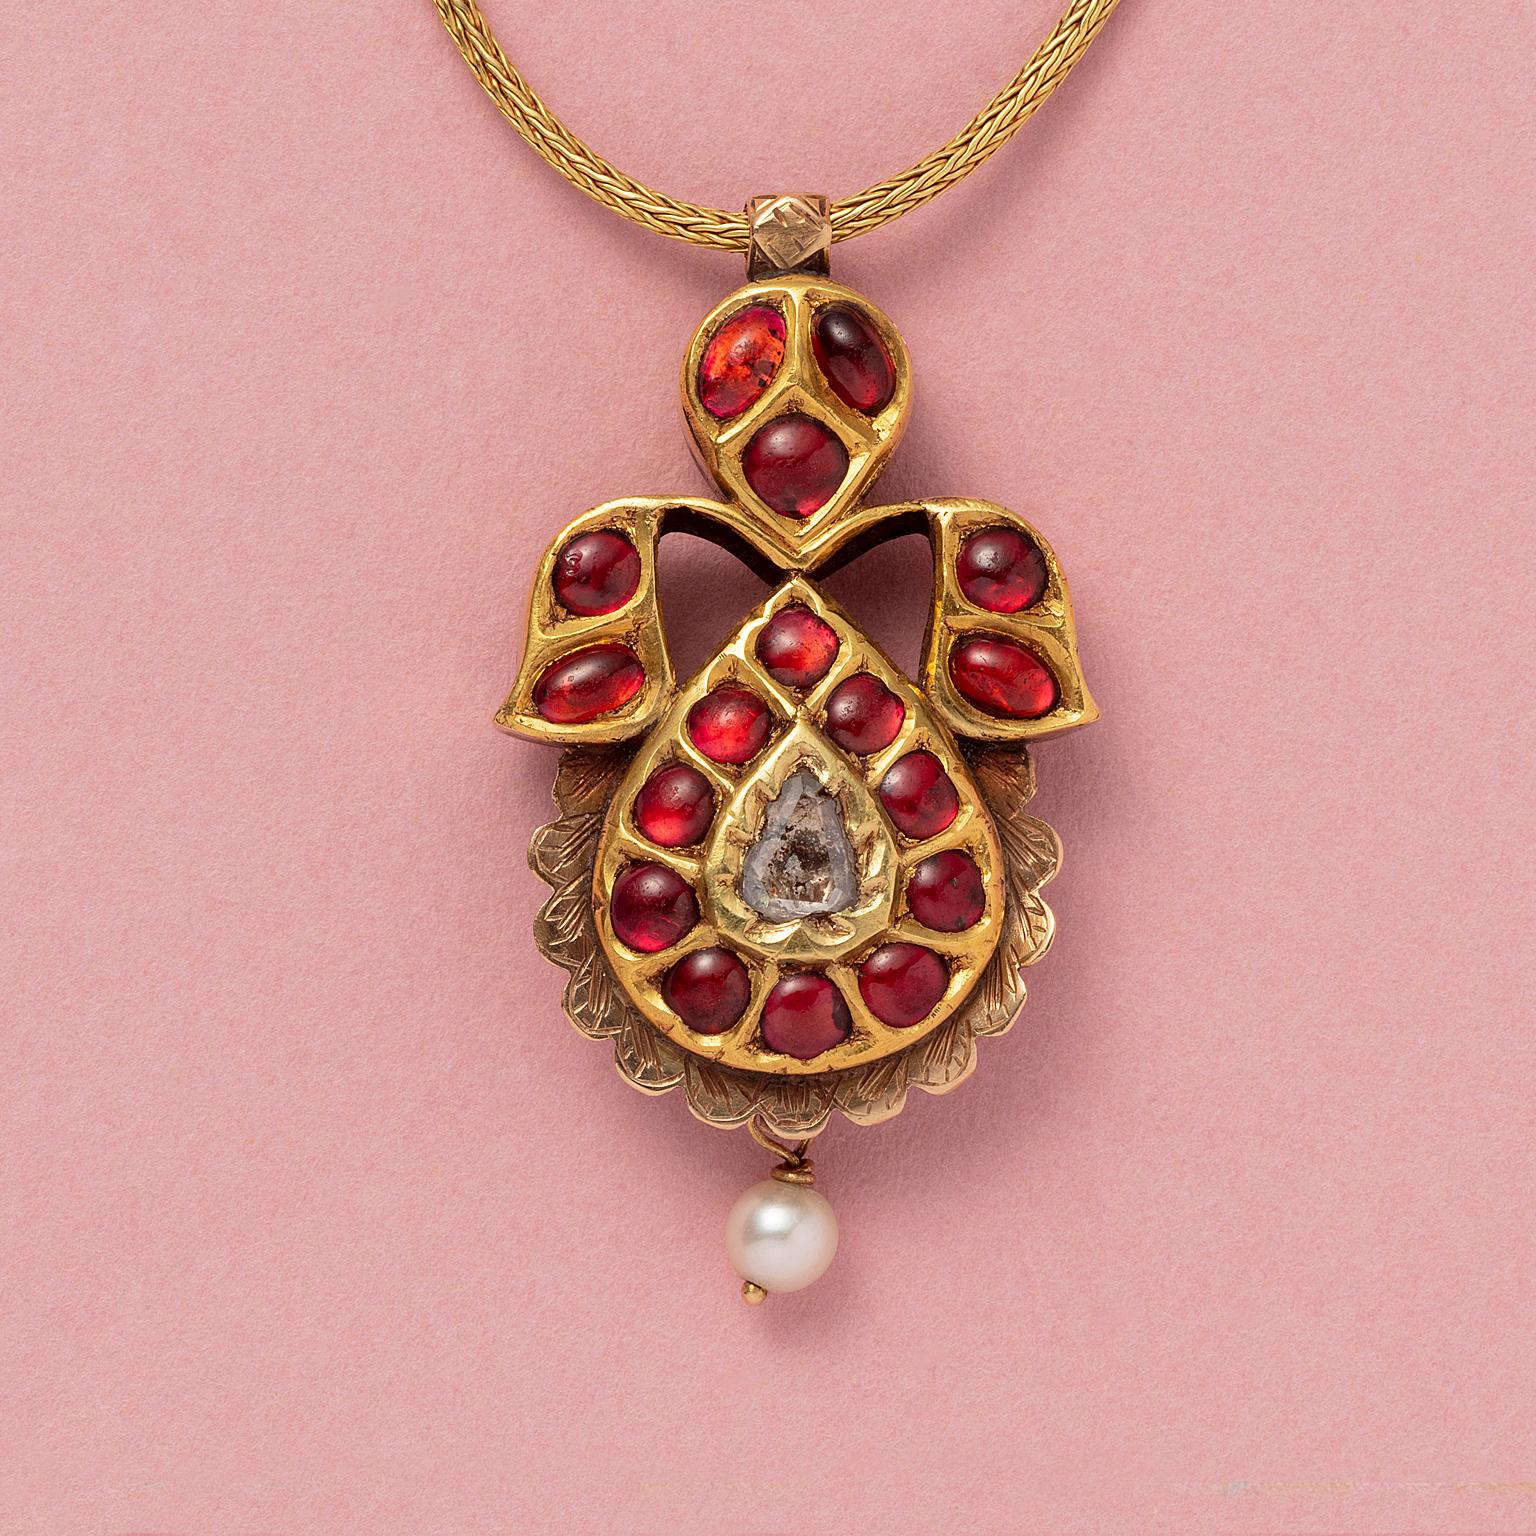 An 18 carat yellow gold amulet or padak pendant from India set with cabochon cut garnets foil set and a diamond in the middle, the back is fully engraved with floral decorations, with a little pearl, with an 18 carat gold necklace and 14 carat gold